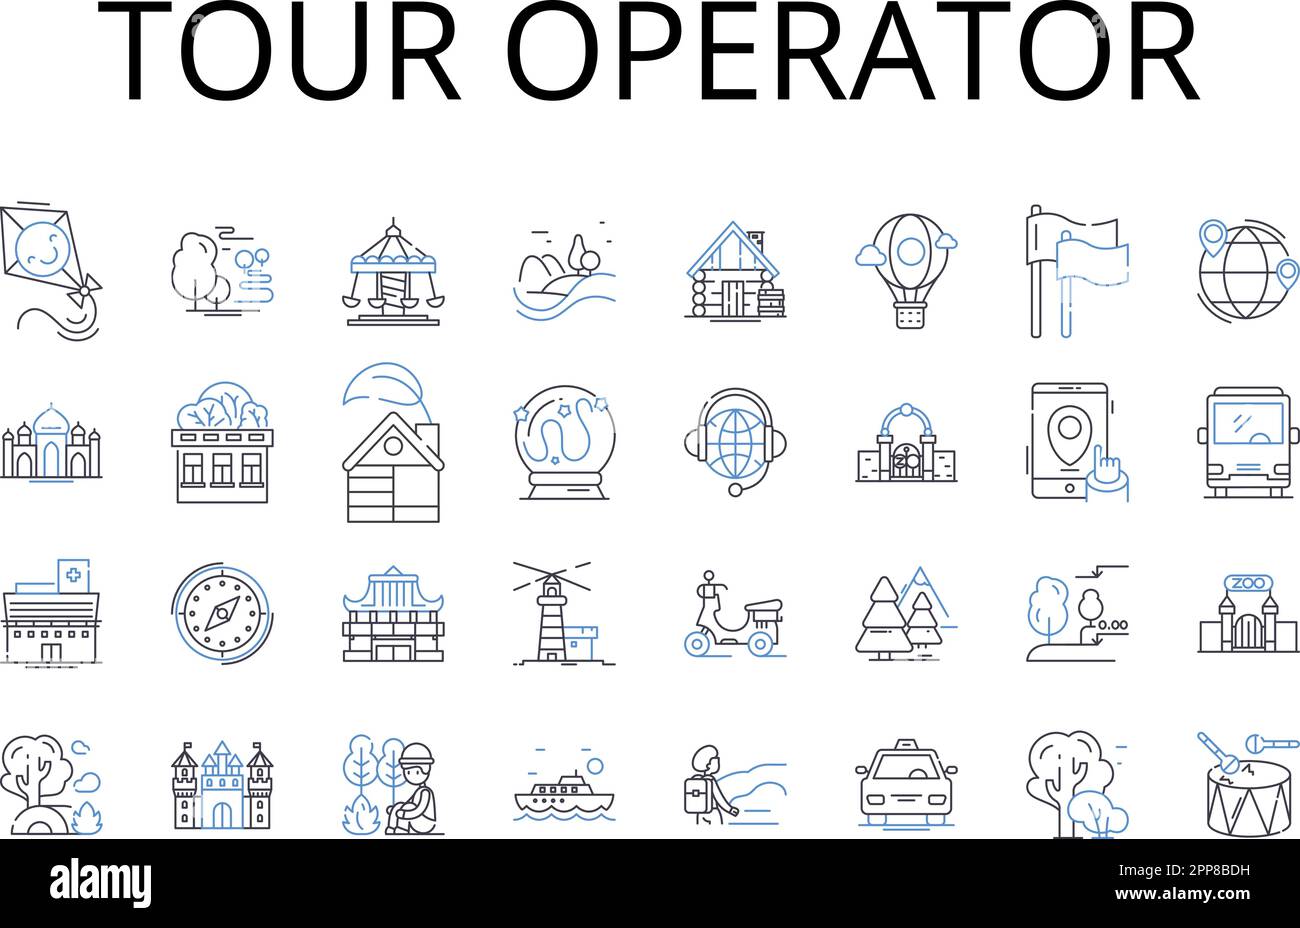 Tour operator line icons collection. Travel agency, Vacation planner, Tour guide, Expedition leader, Adventure organizer, Road trip expert, Getaway Stock Vector